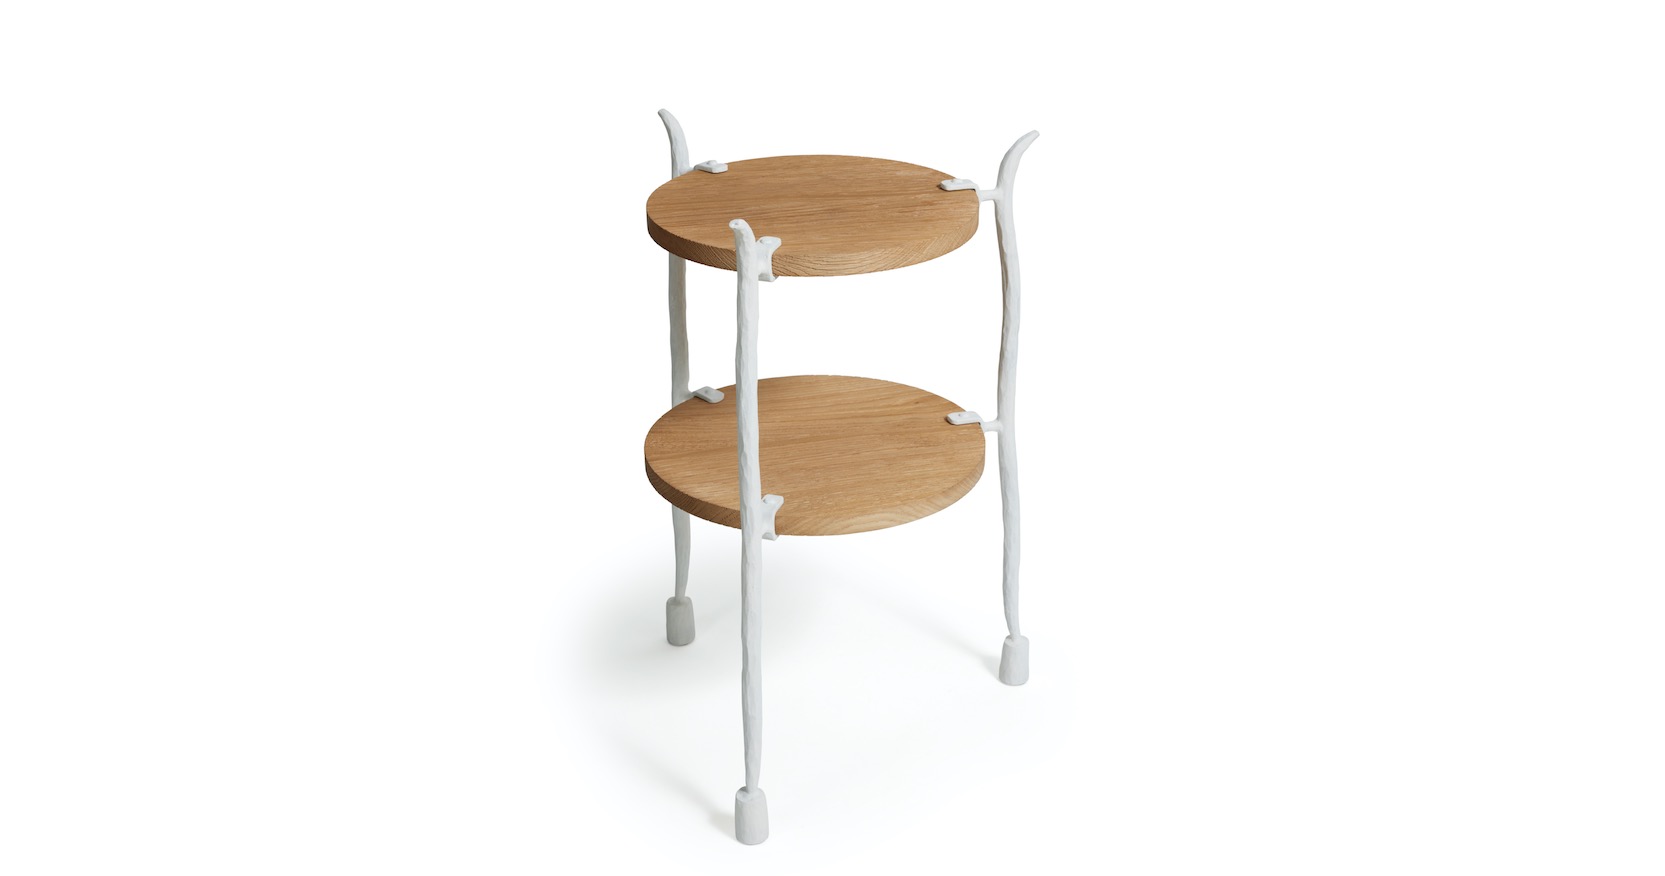 Garouste Bonetti, round side table in white wrought iron with 3 legs, and 2 tops in oak